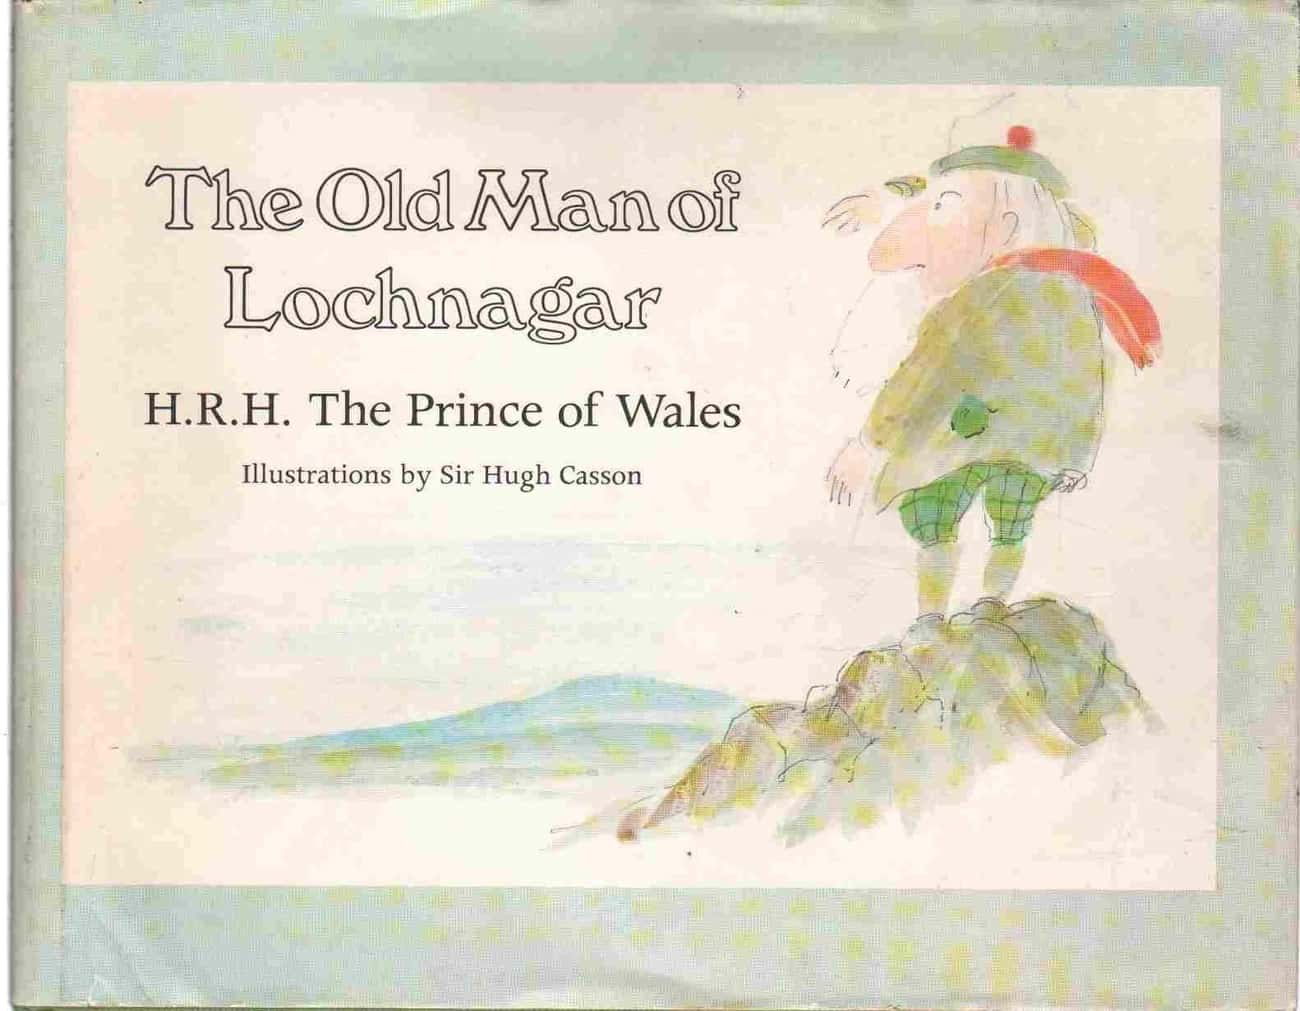 He Wrote A Children's Book Called 'The Old Man of Lochnagar'